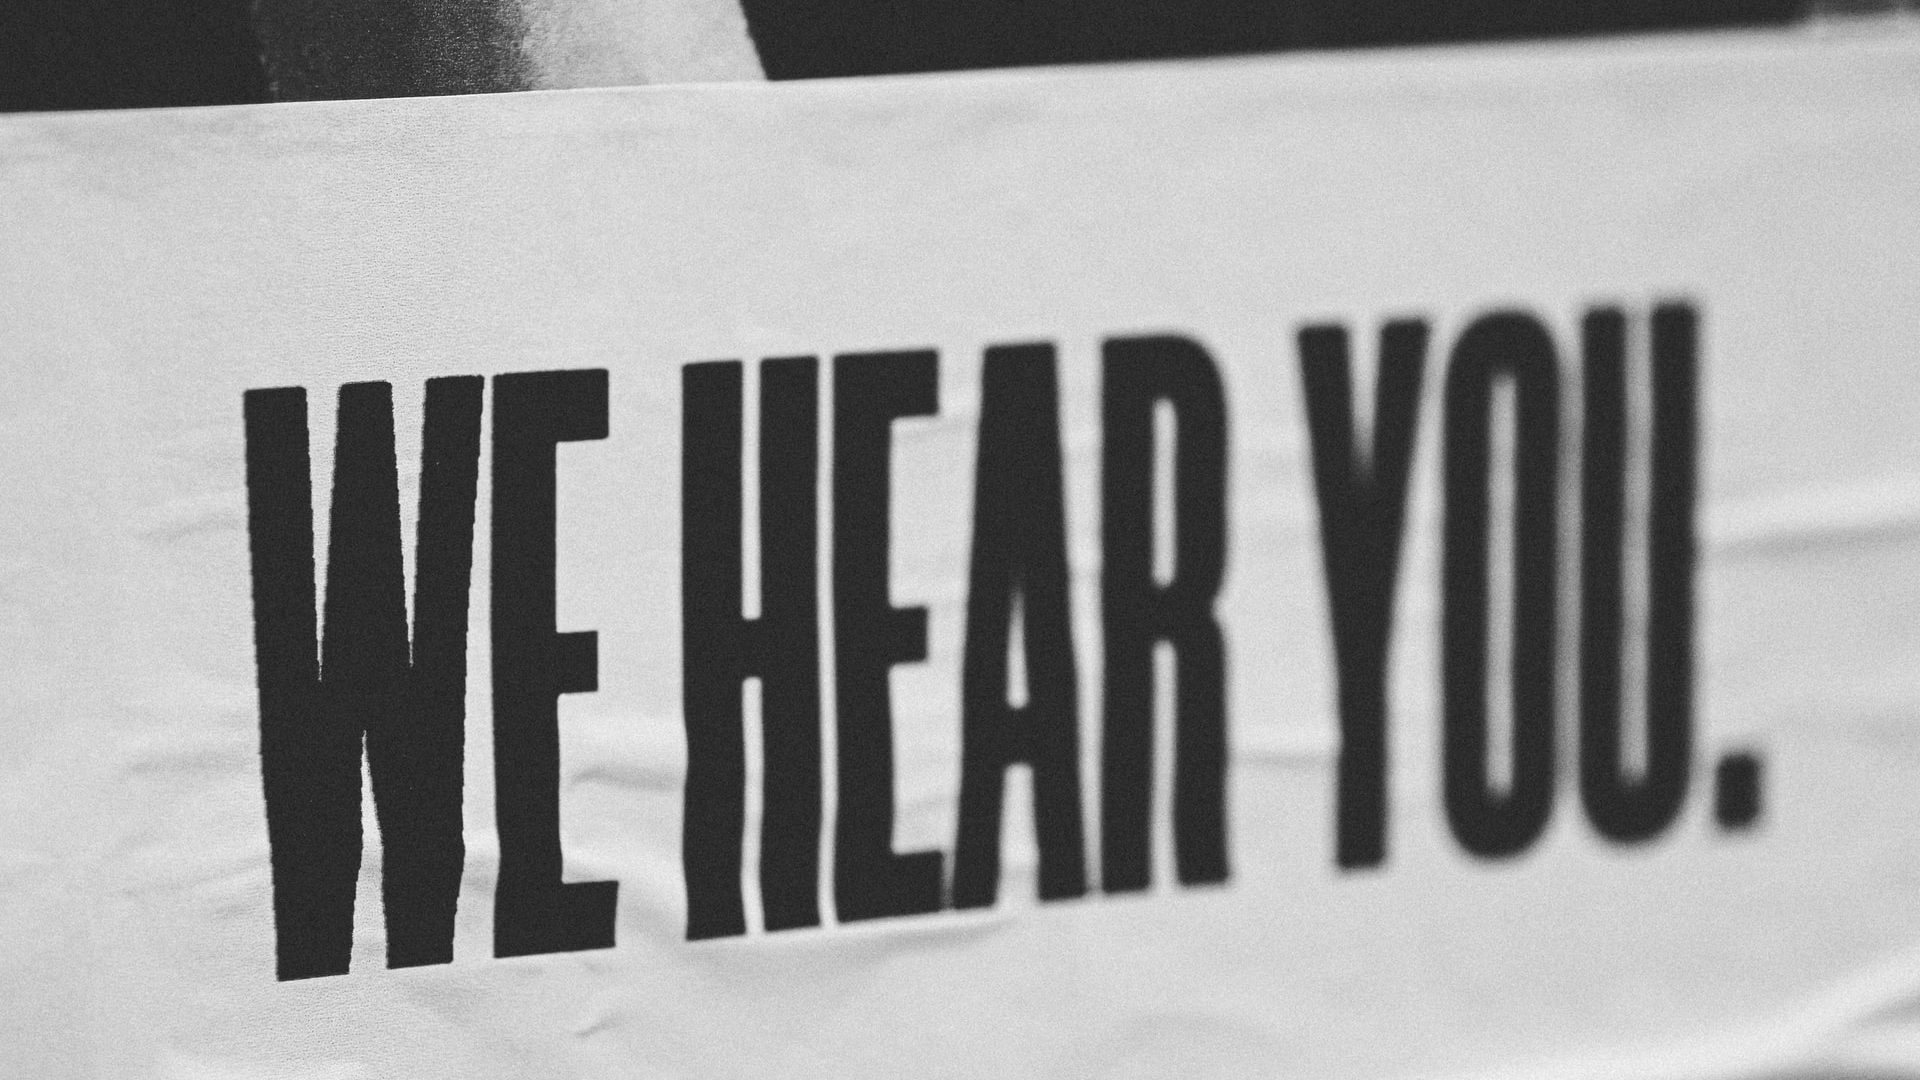 Poster showing the words 'We Hear You'